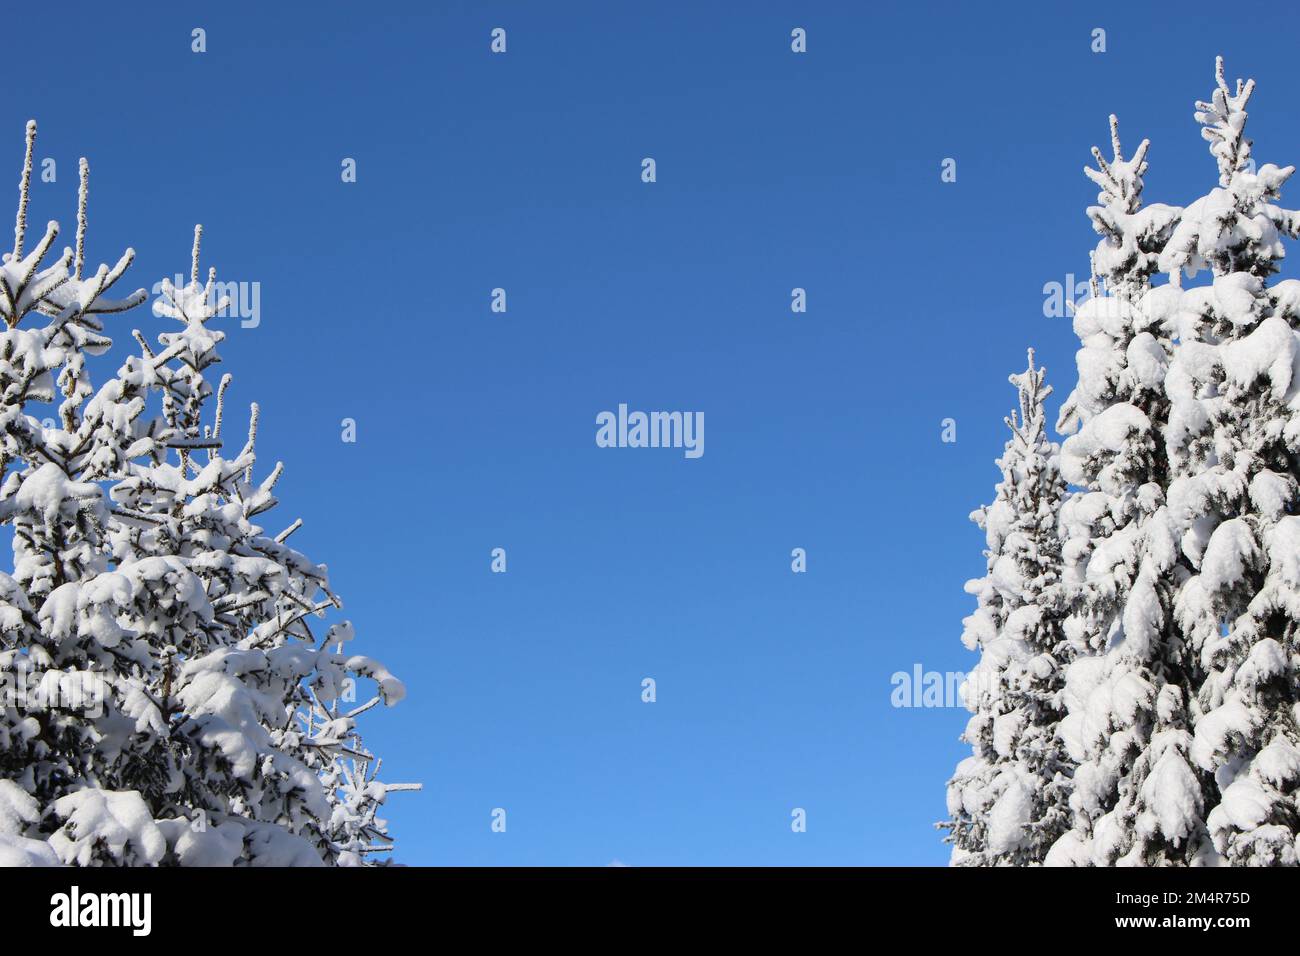 Winter wonderland natural winter background with crisp clear blue skies and tall snow covered evergreens framing the image & blank copy space between Stock Photo